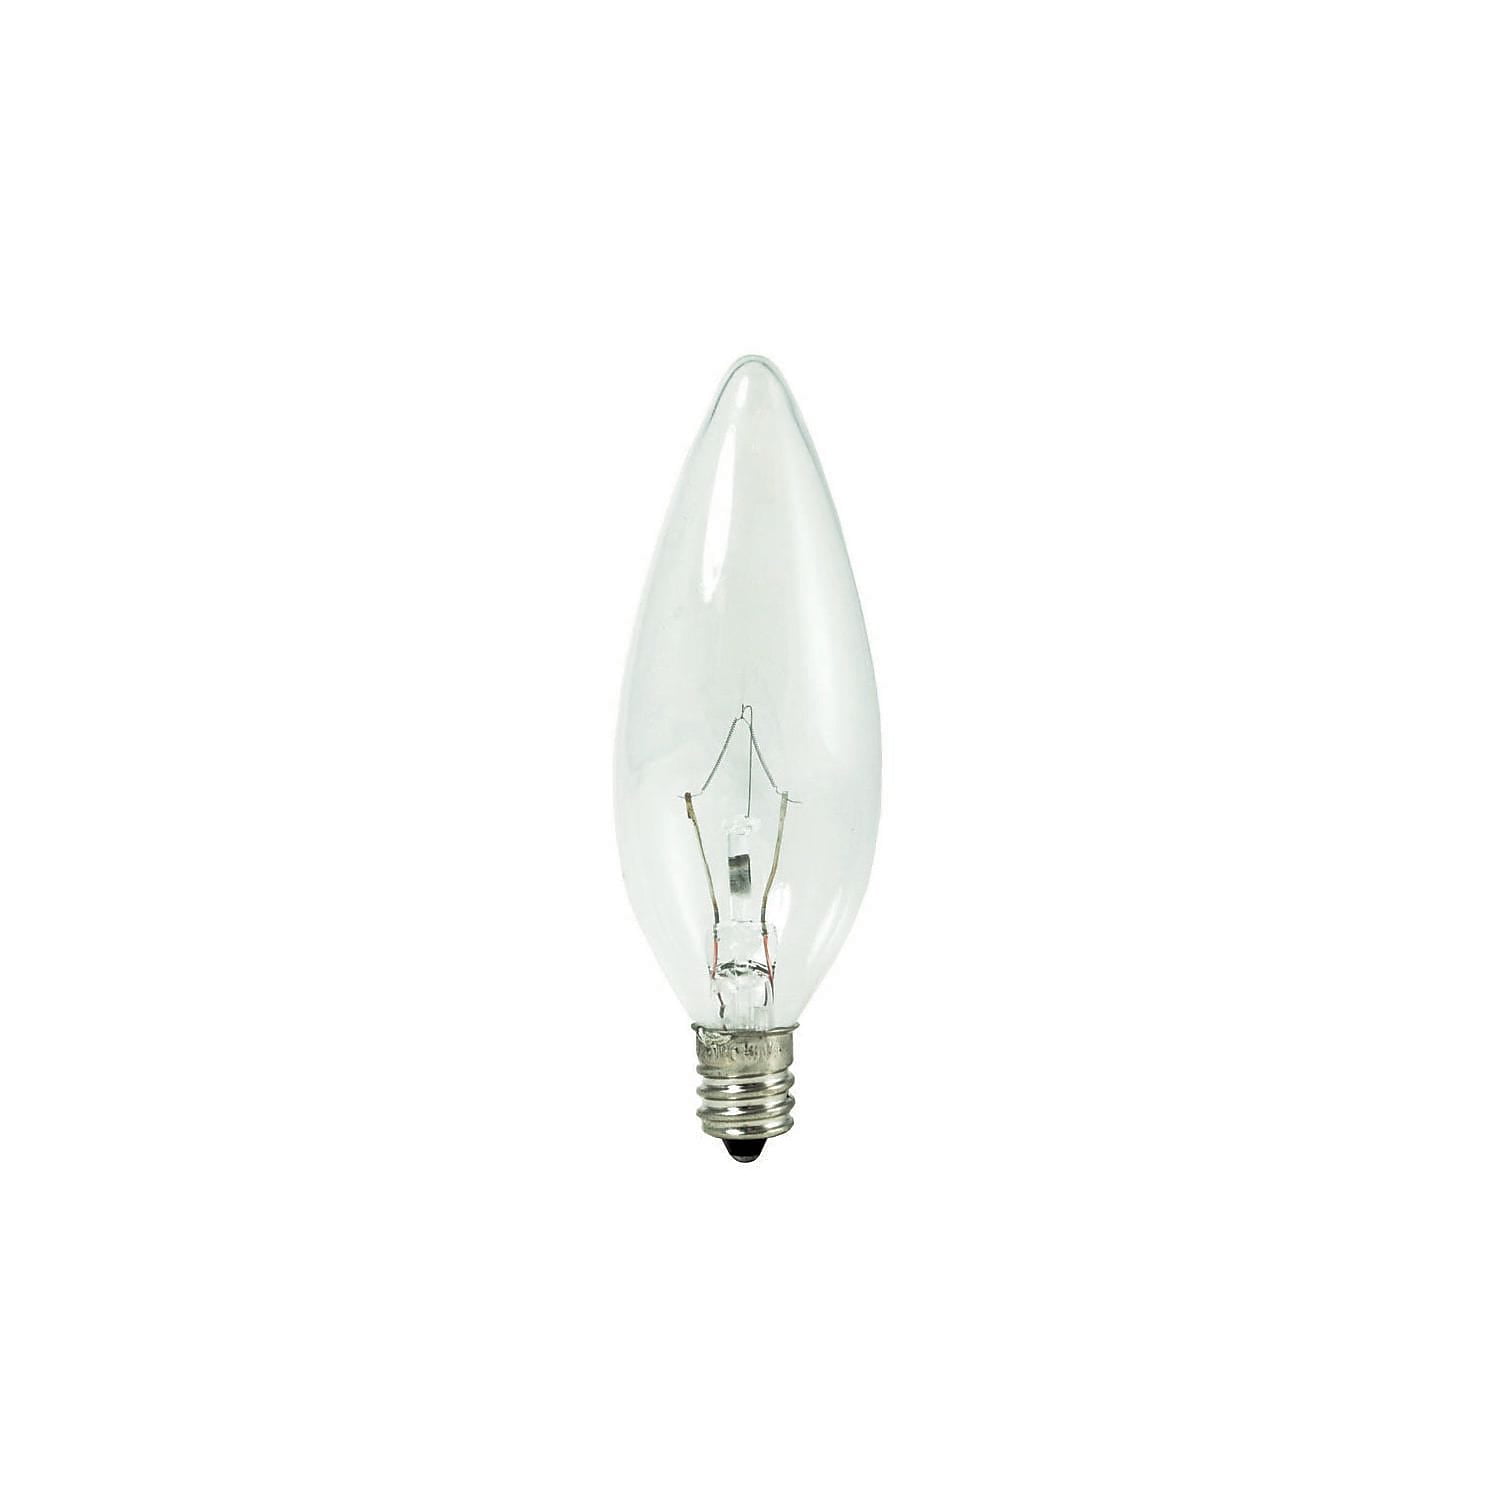 Picture of Bulbrite Krystal Touch Pack of (20) 25 Watt Dimmable Clear B10 Torpedo Krypton Light Bulbs with Candelabra (E12) Base  2700K Warm White Light